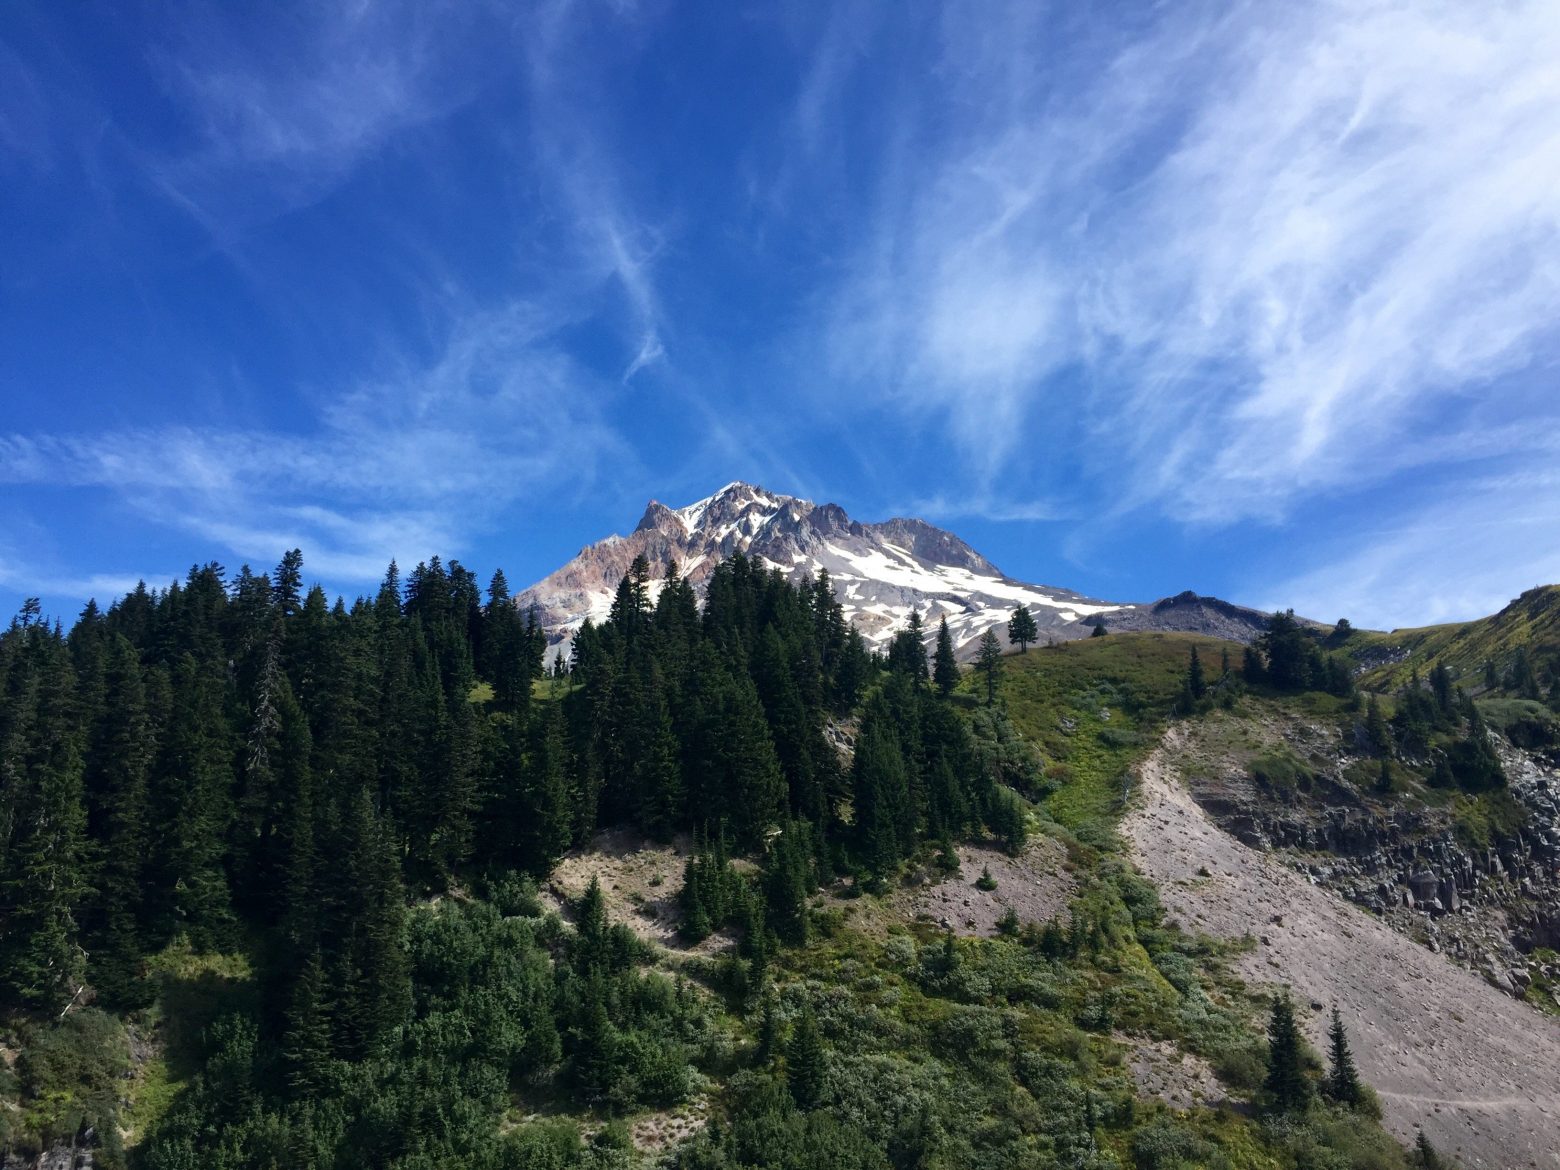 Mount Hood rising high above the PCT